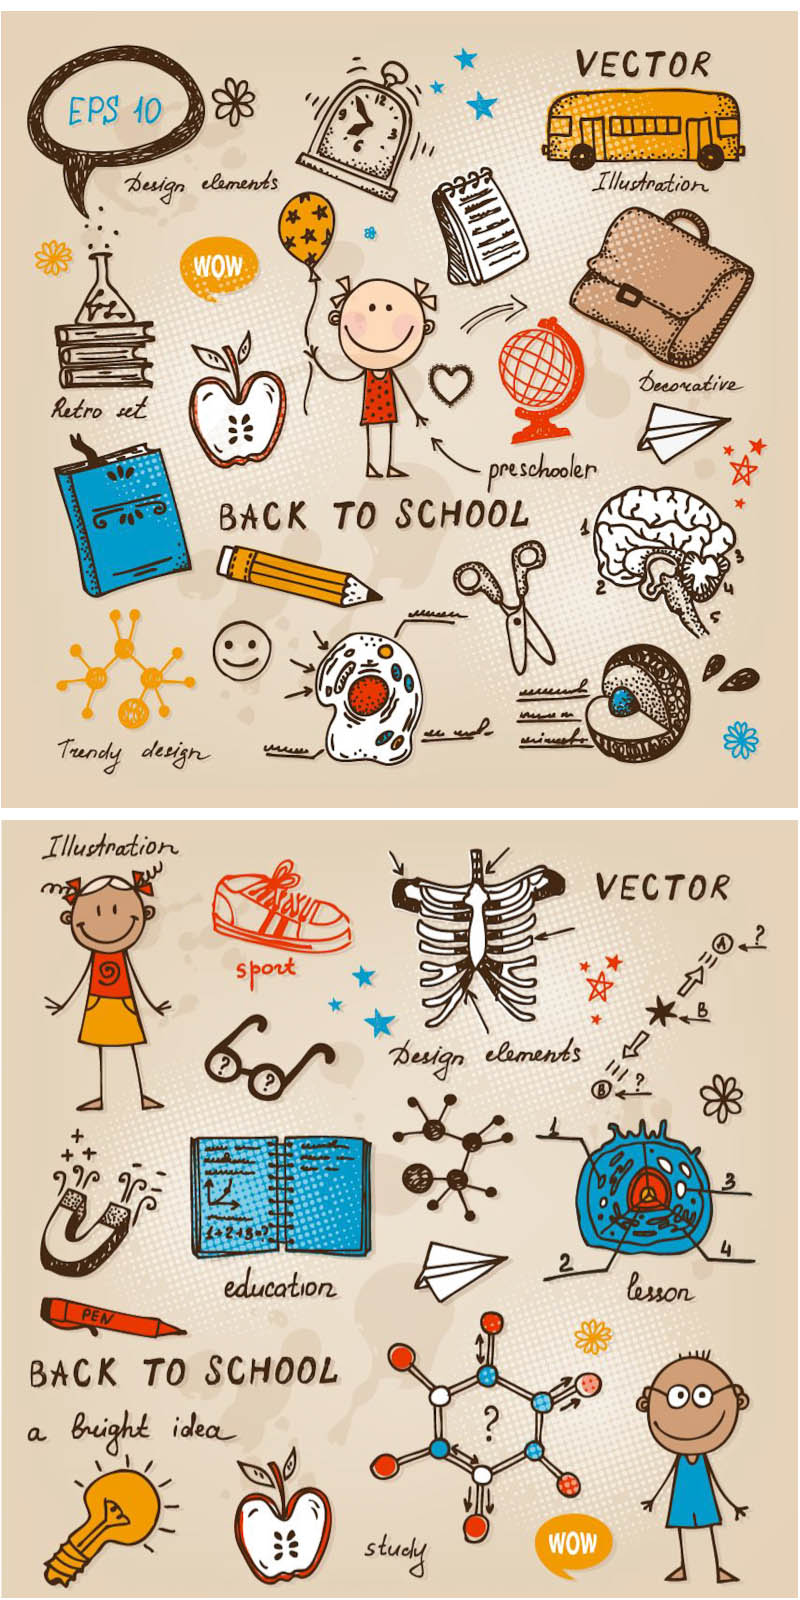 Hand drawn back to school design elements vector